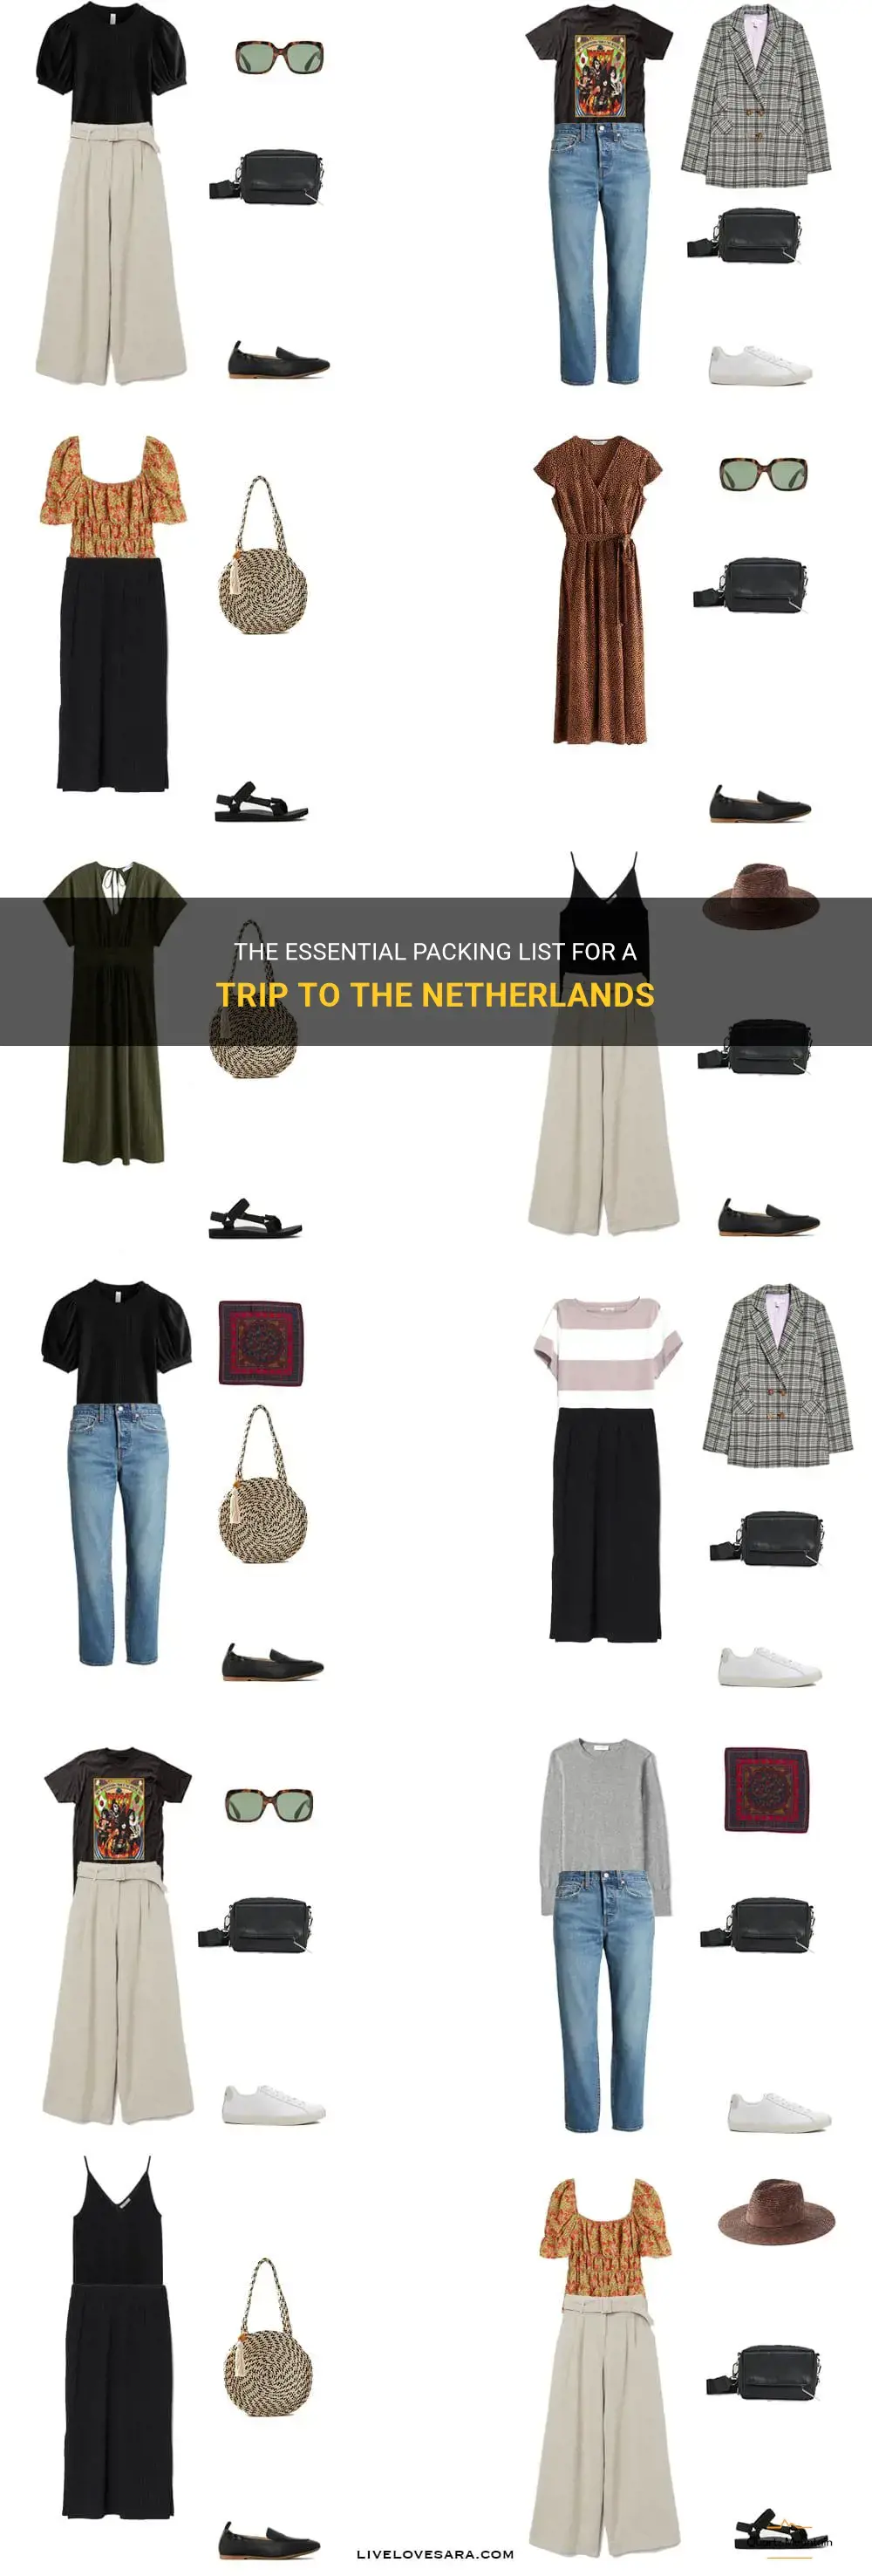 what should I pack for a trip to netherlands